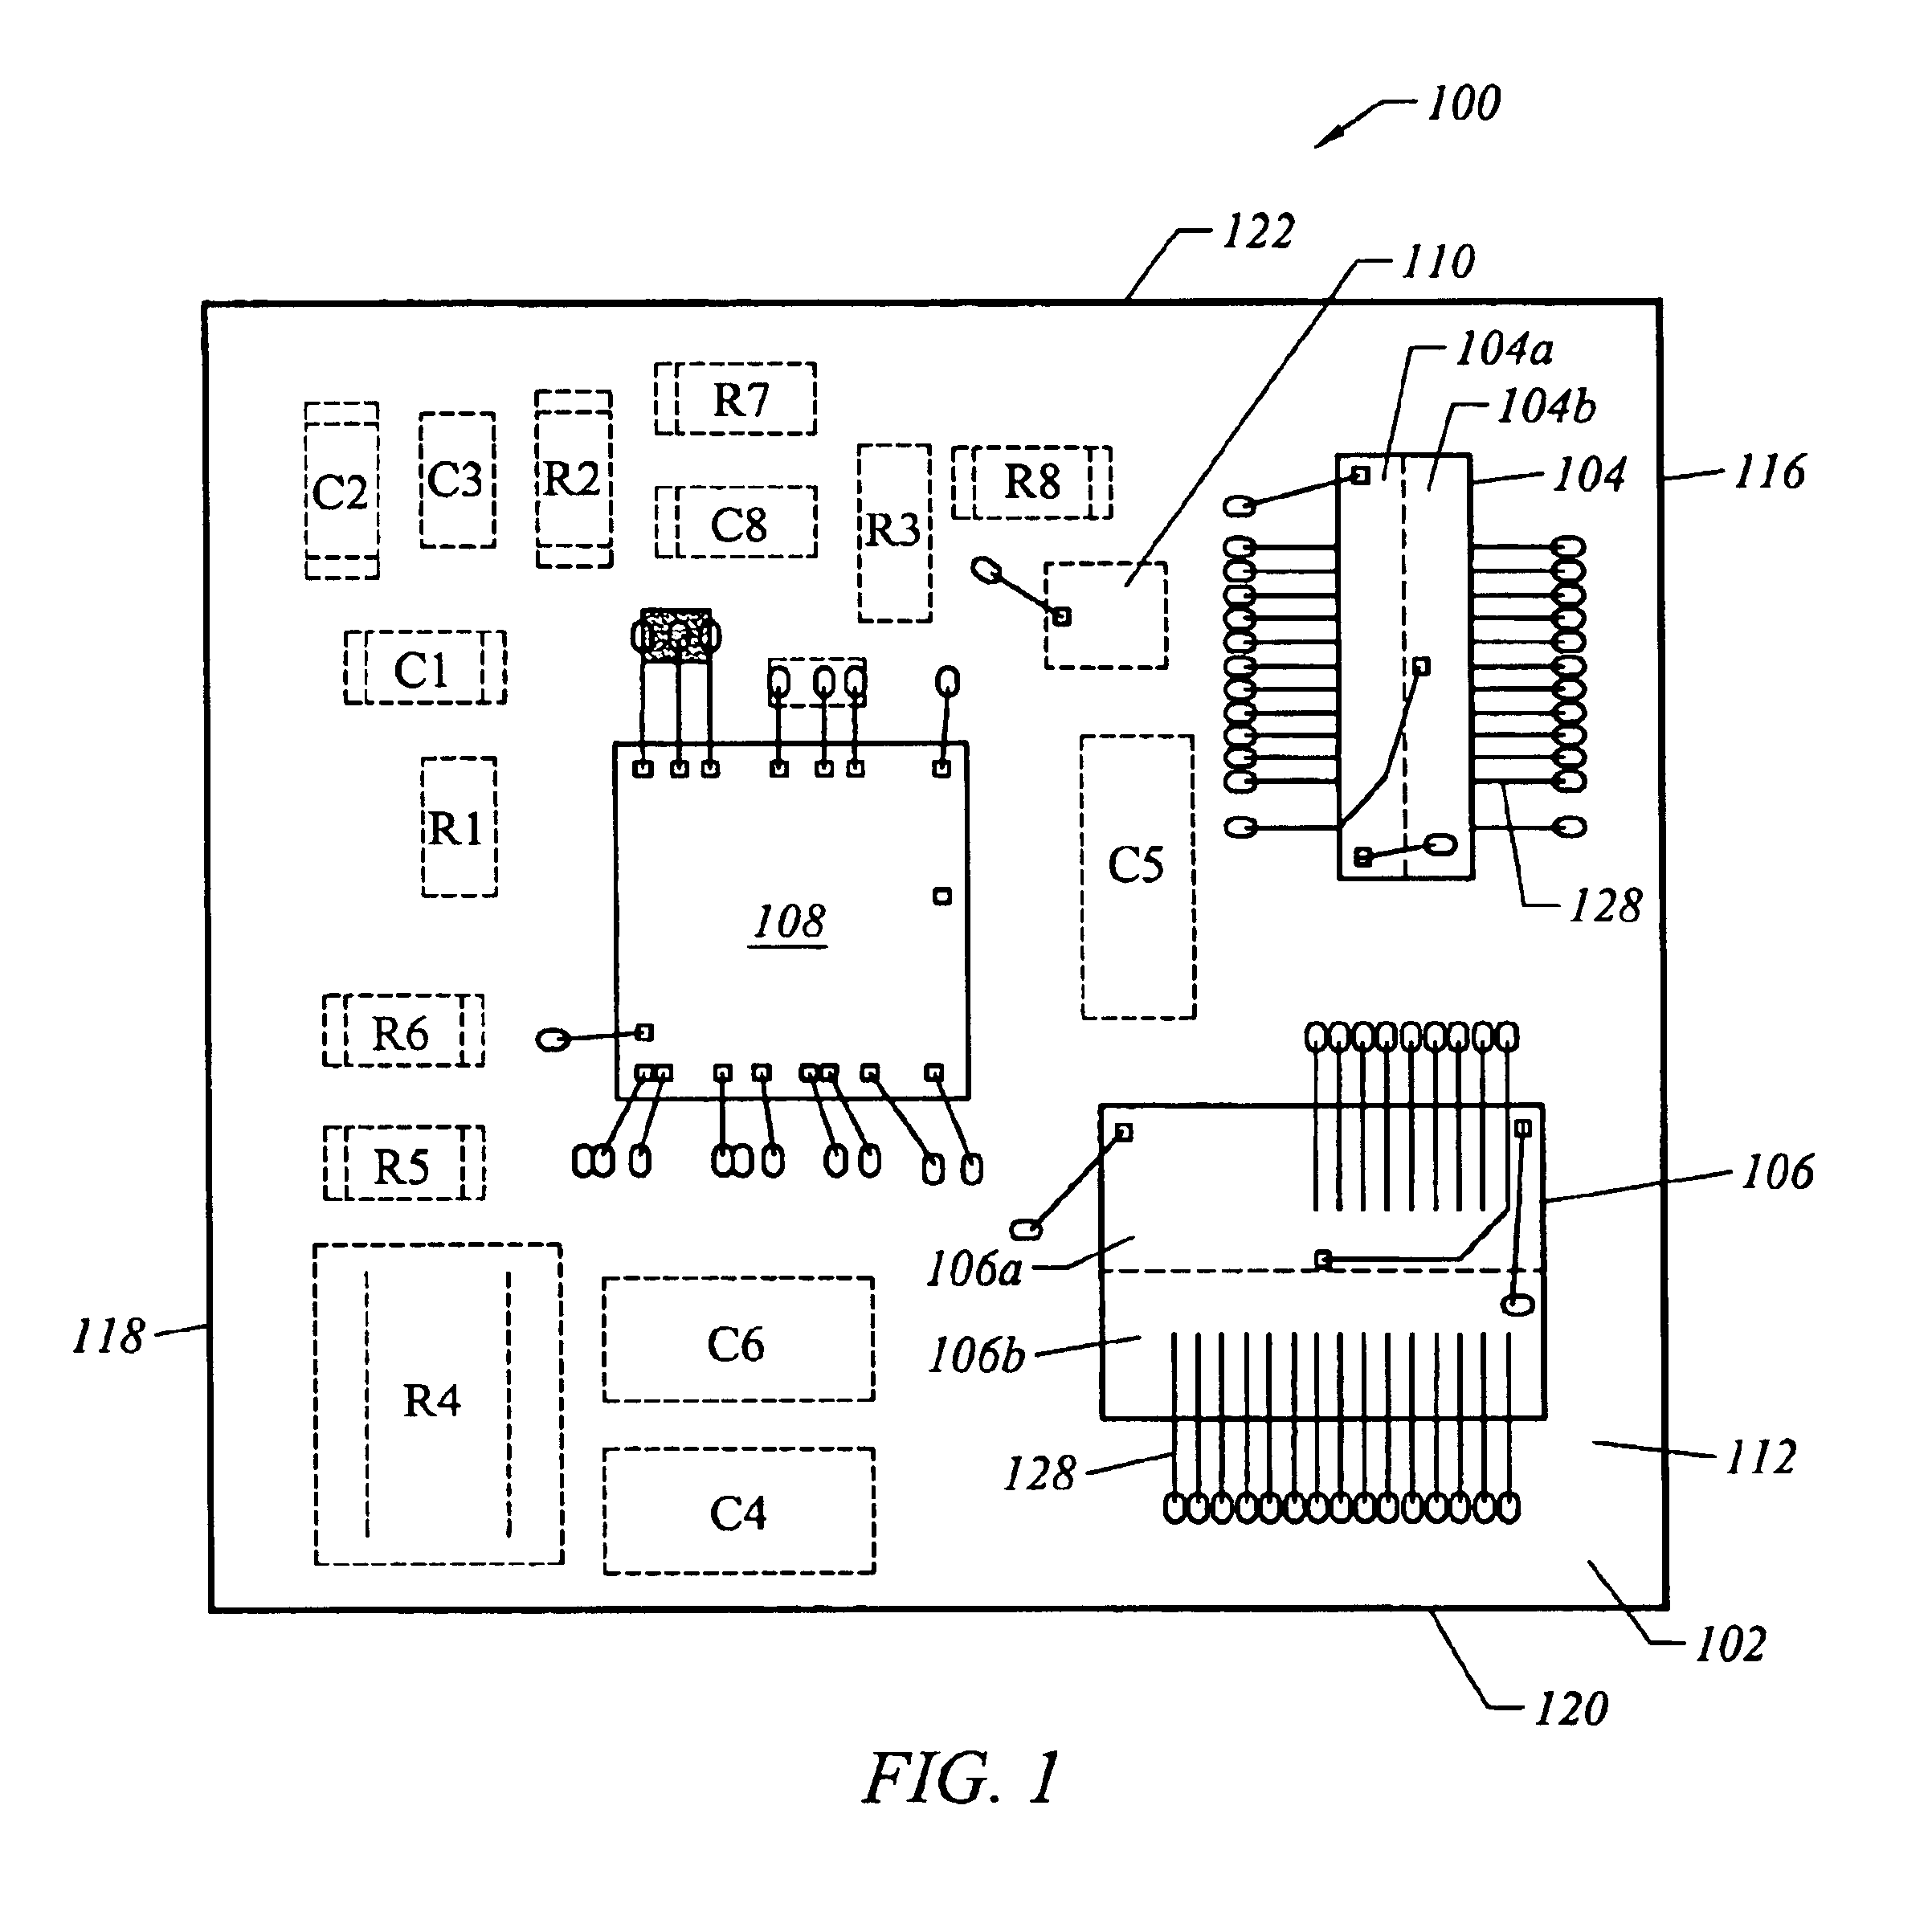 DC-DC converter implemented in a land grid array package